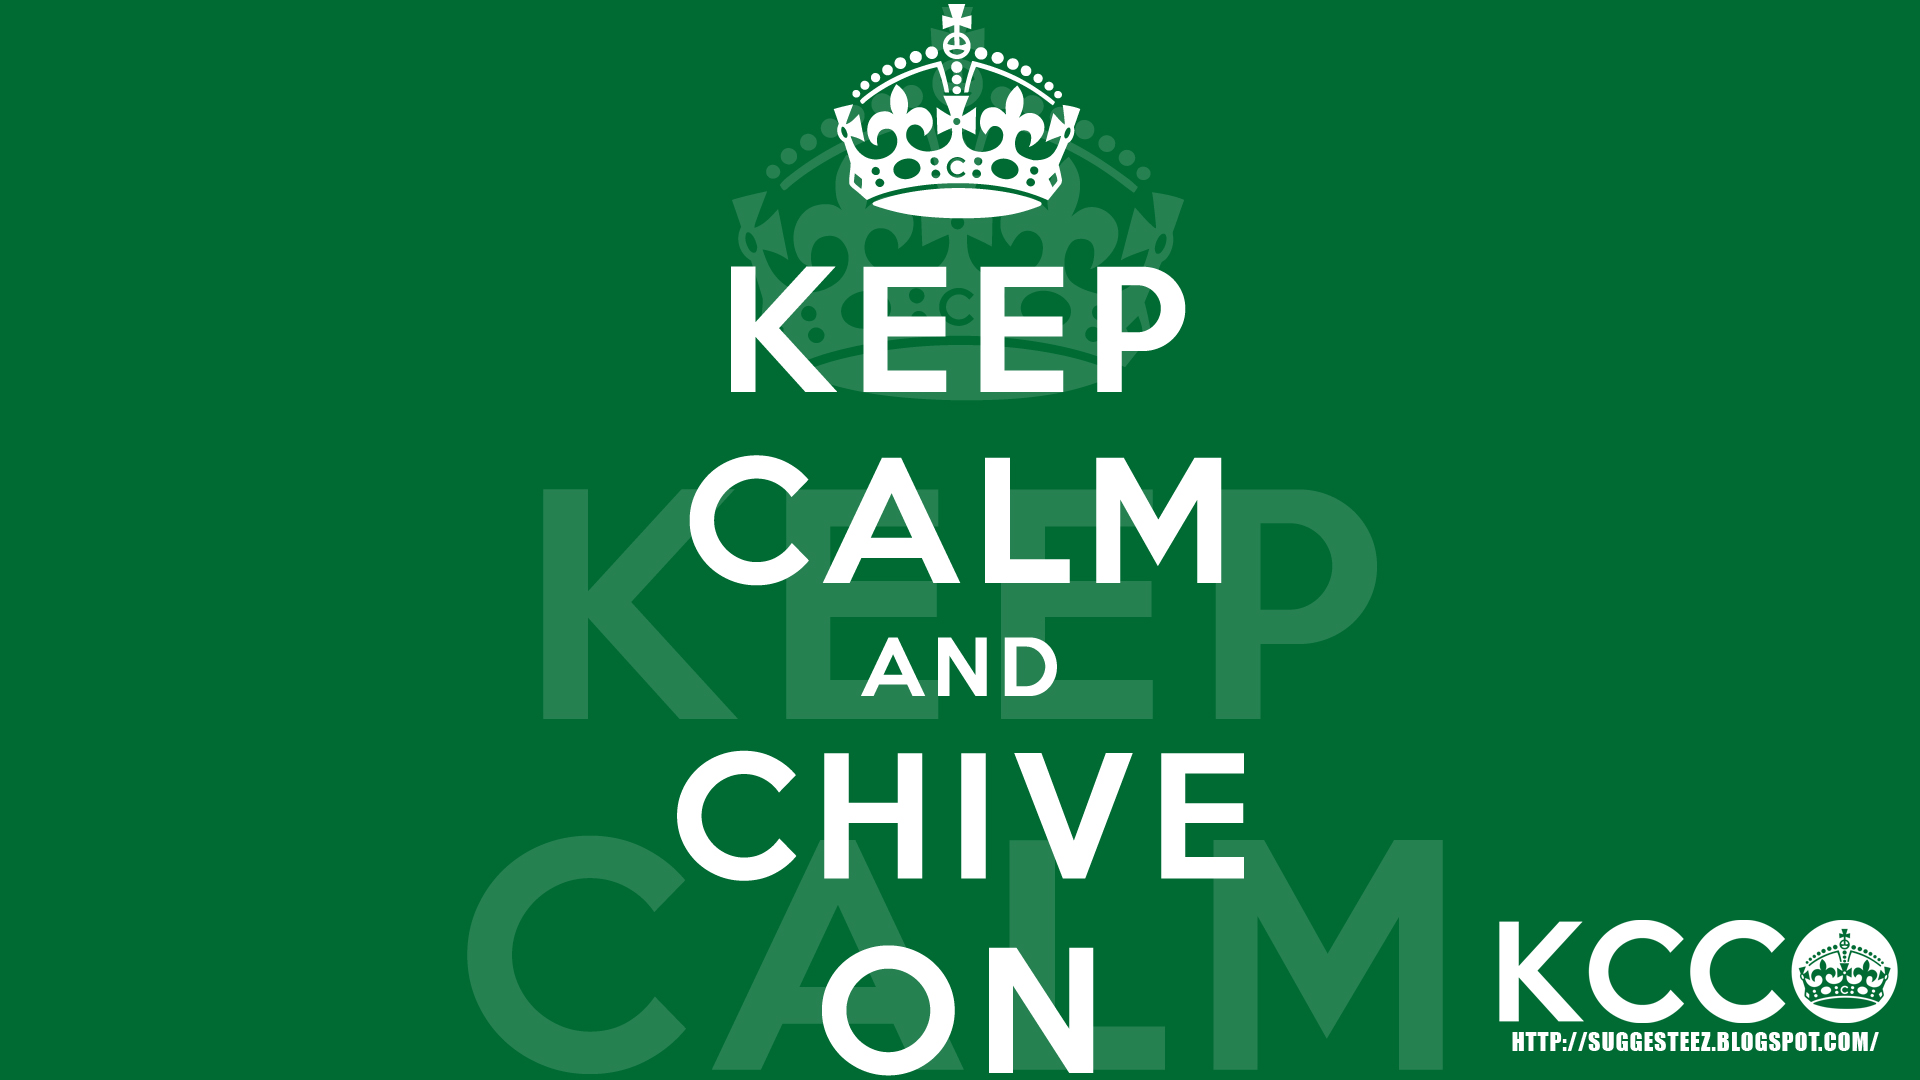 Thechive HD Wallpaper By Suggesteez